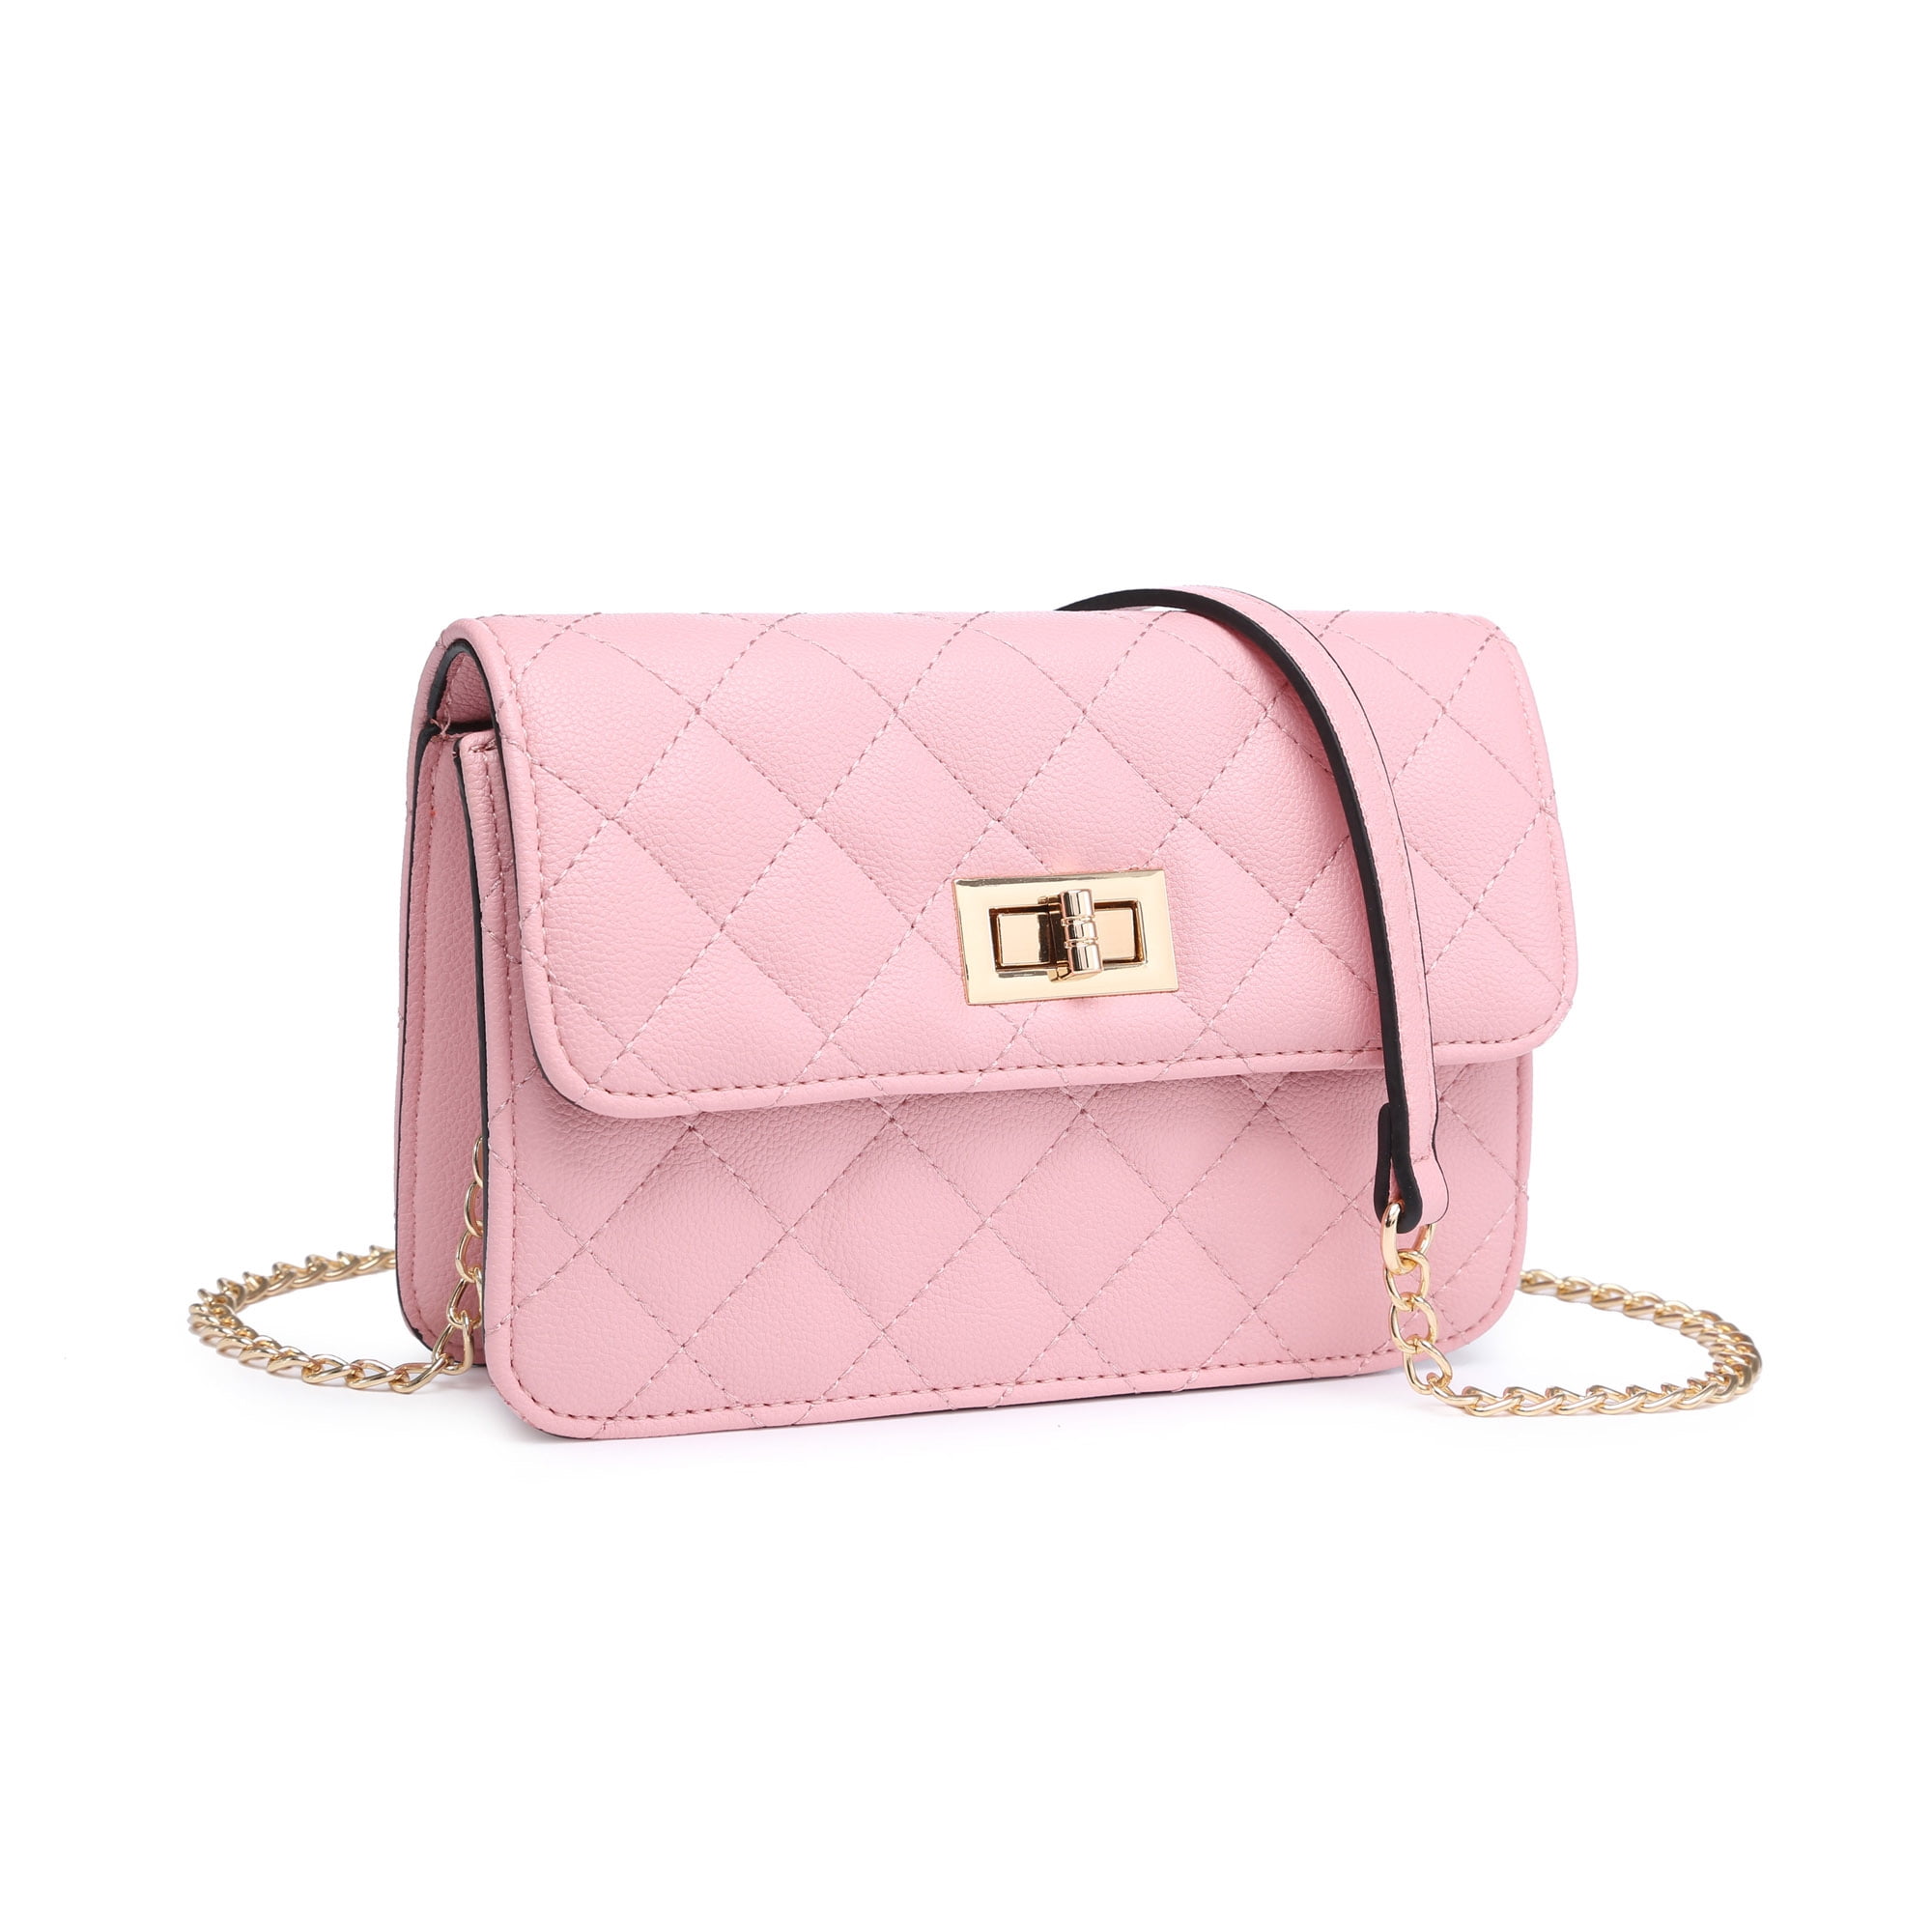 Poppy Womens Quilted Crossbody Bag Handbags Vegan Leather Purses for Women Shoulder Bag with Chain Strap, Women's, Size: One size, Pink